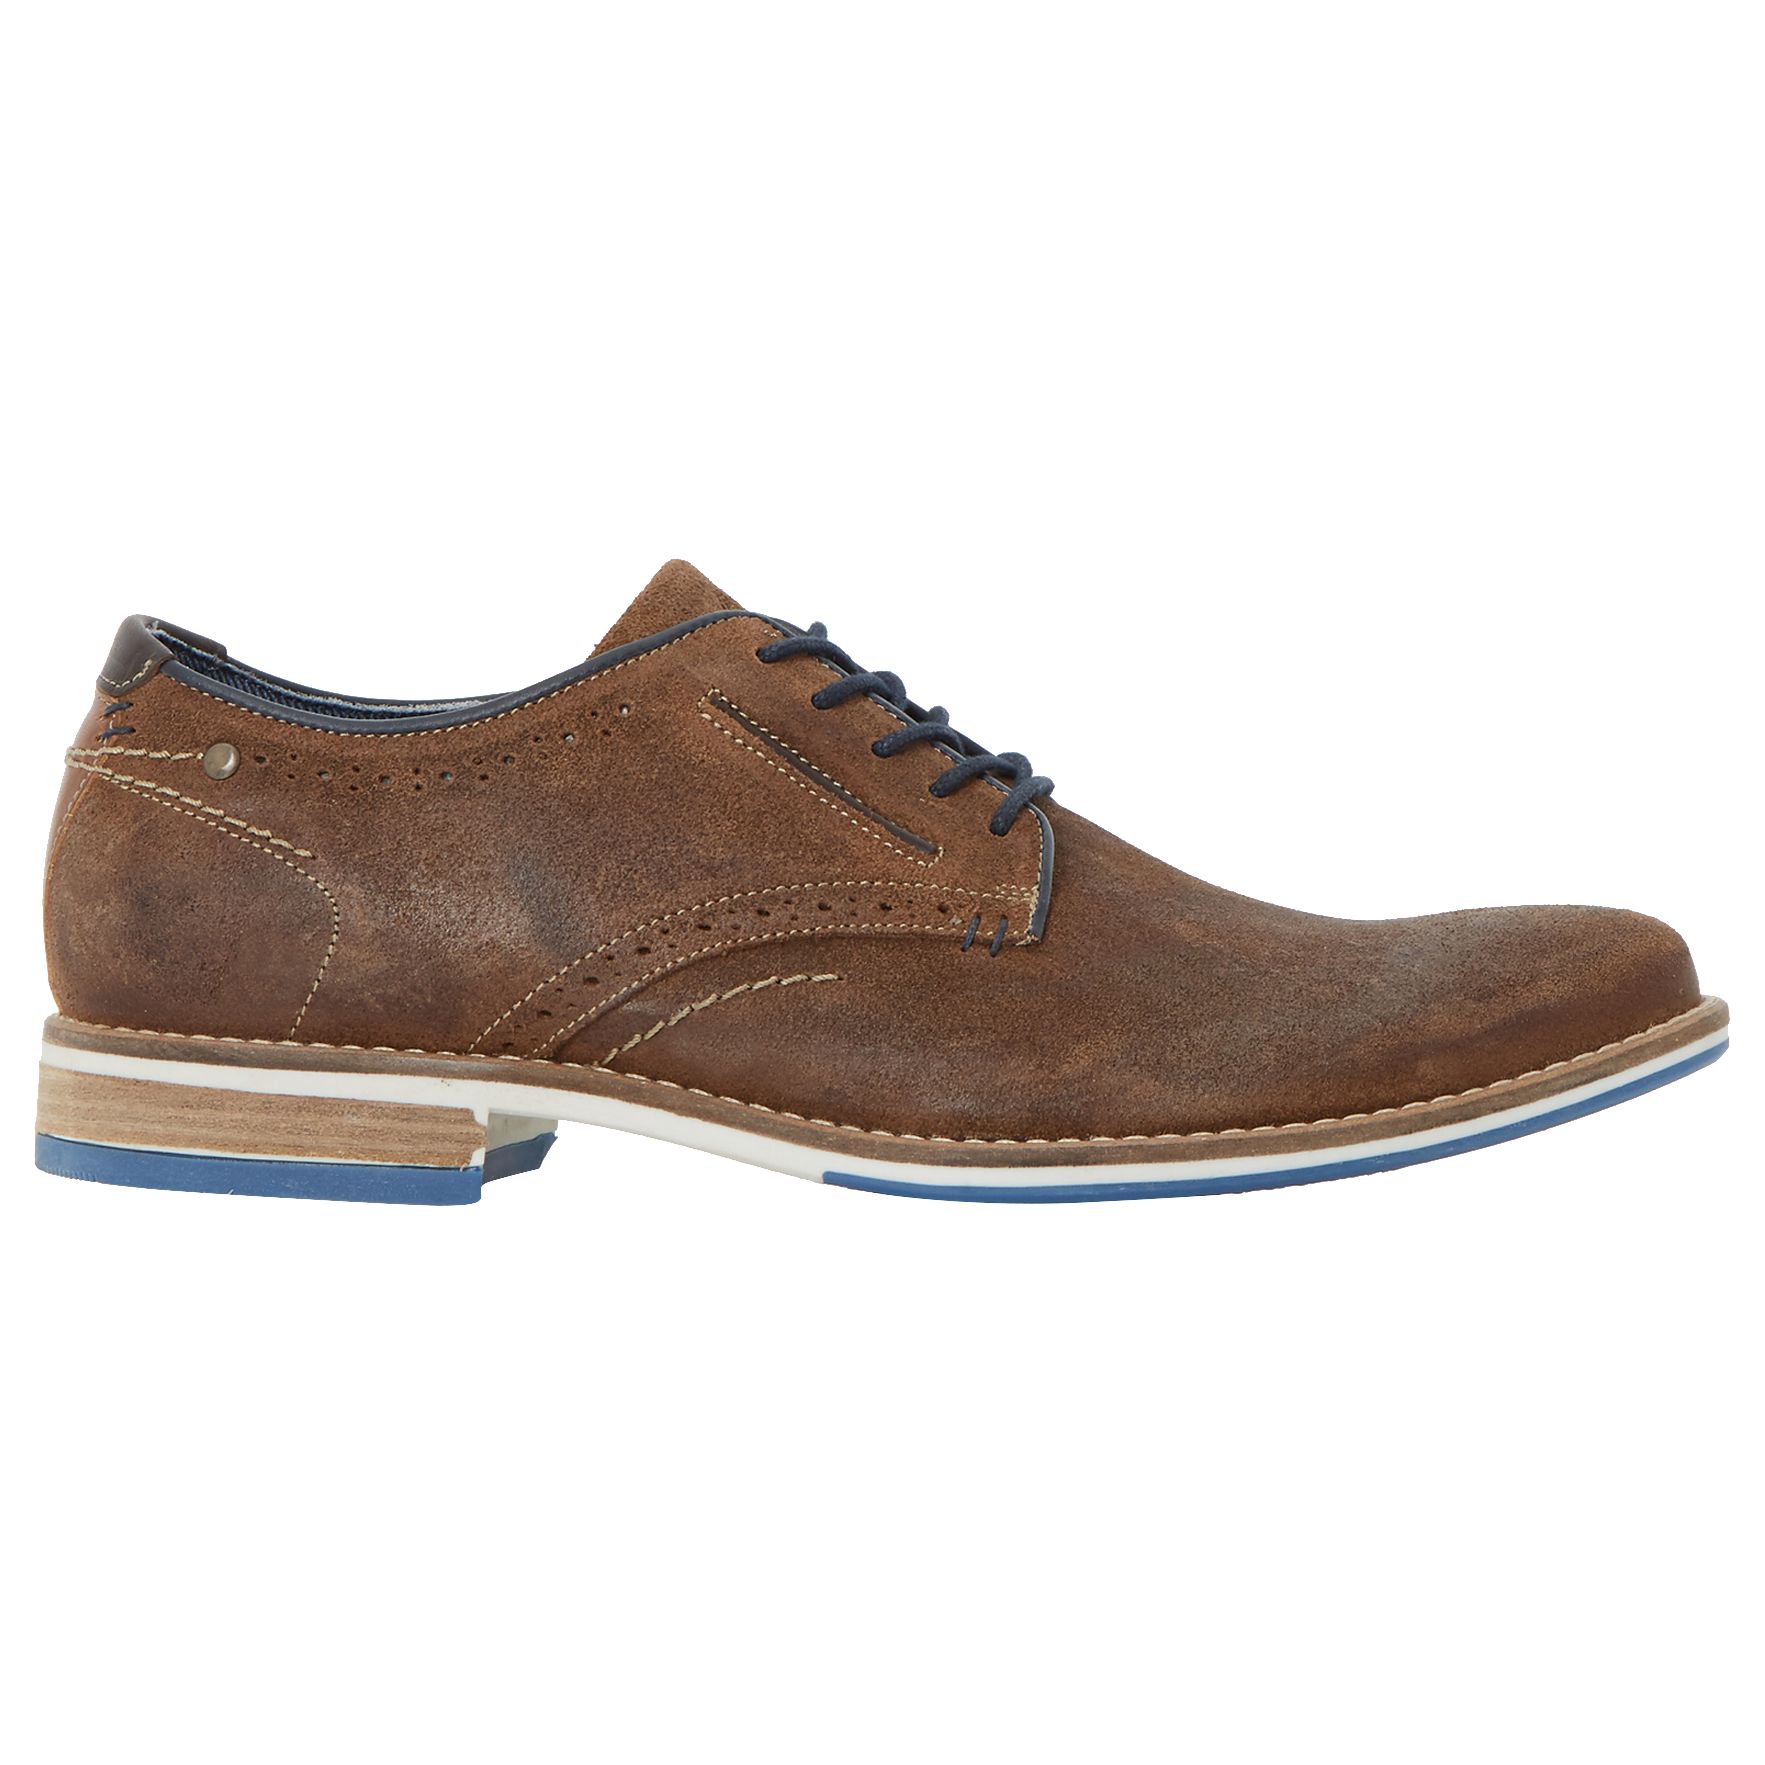 Dune Brewer Gibson Suede Shoes, Tan Suede, 6